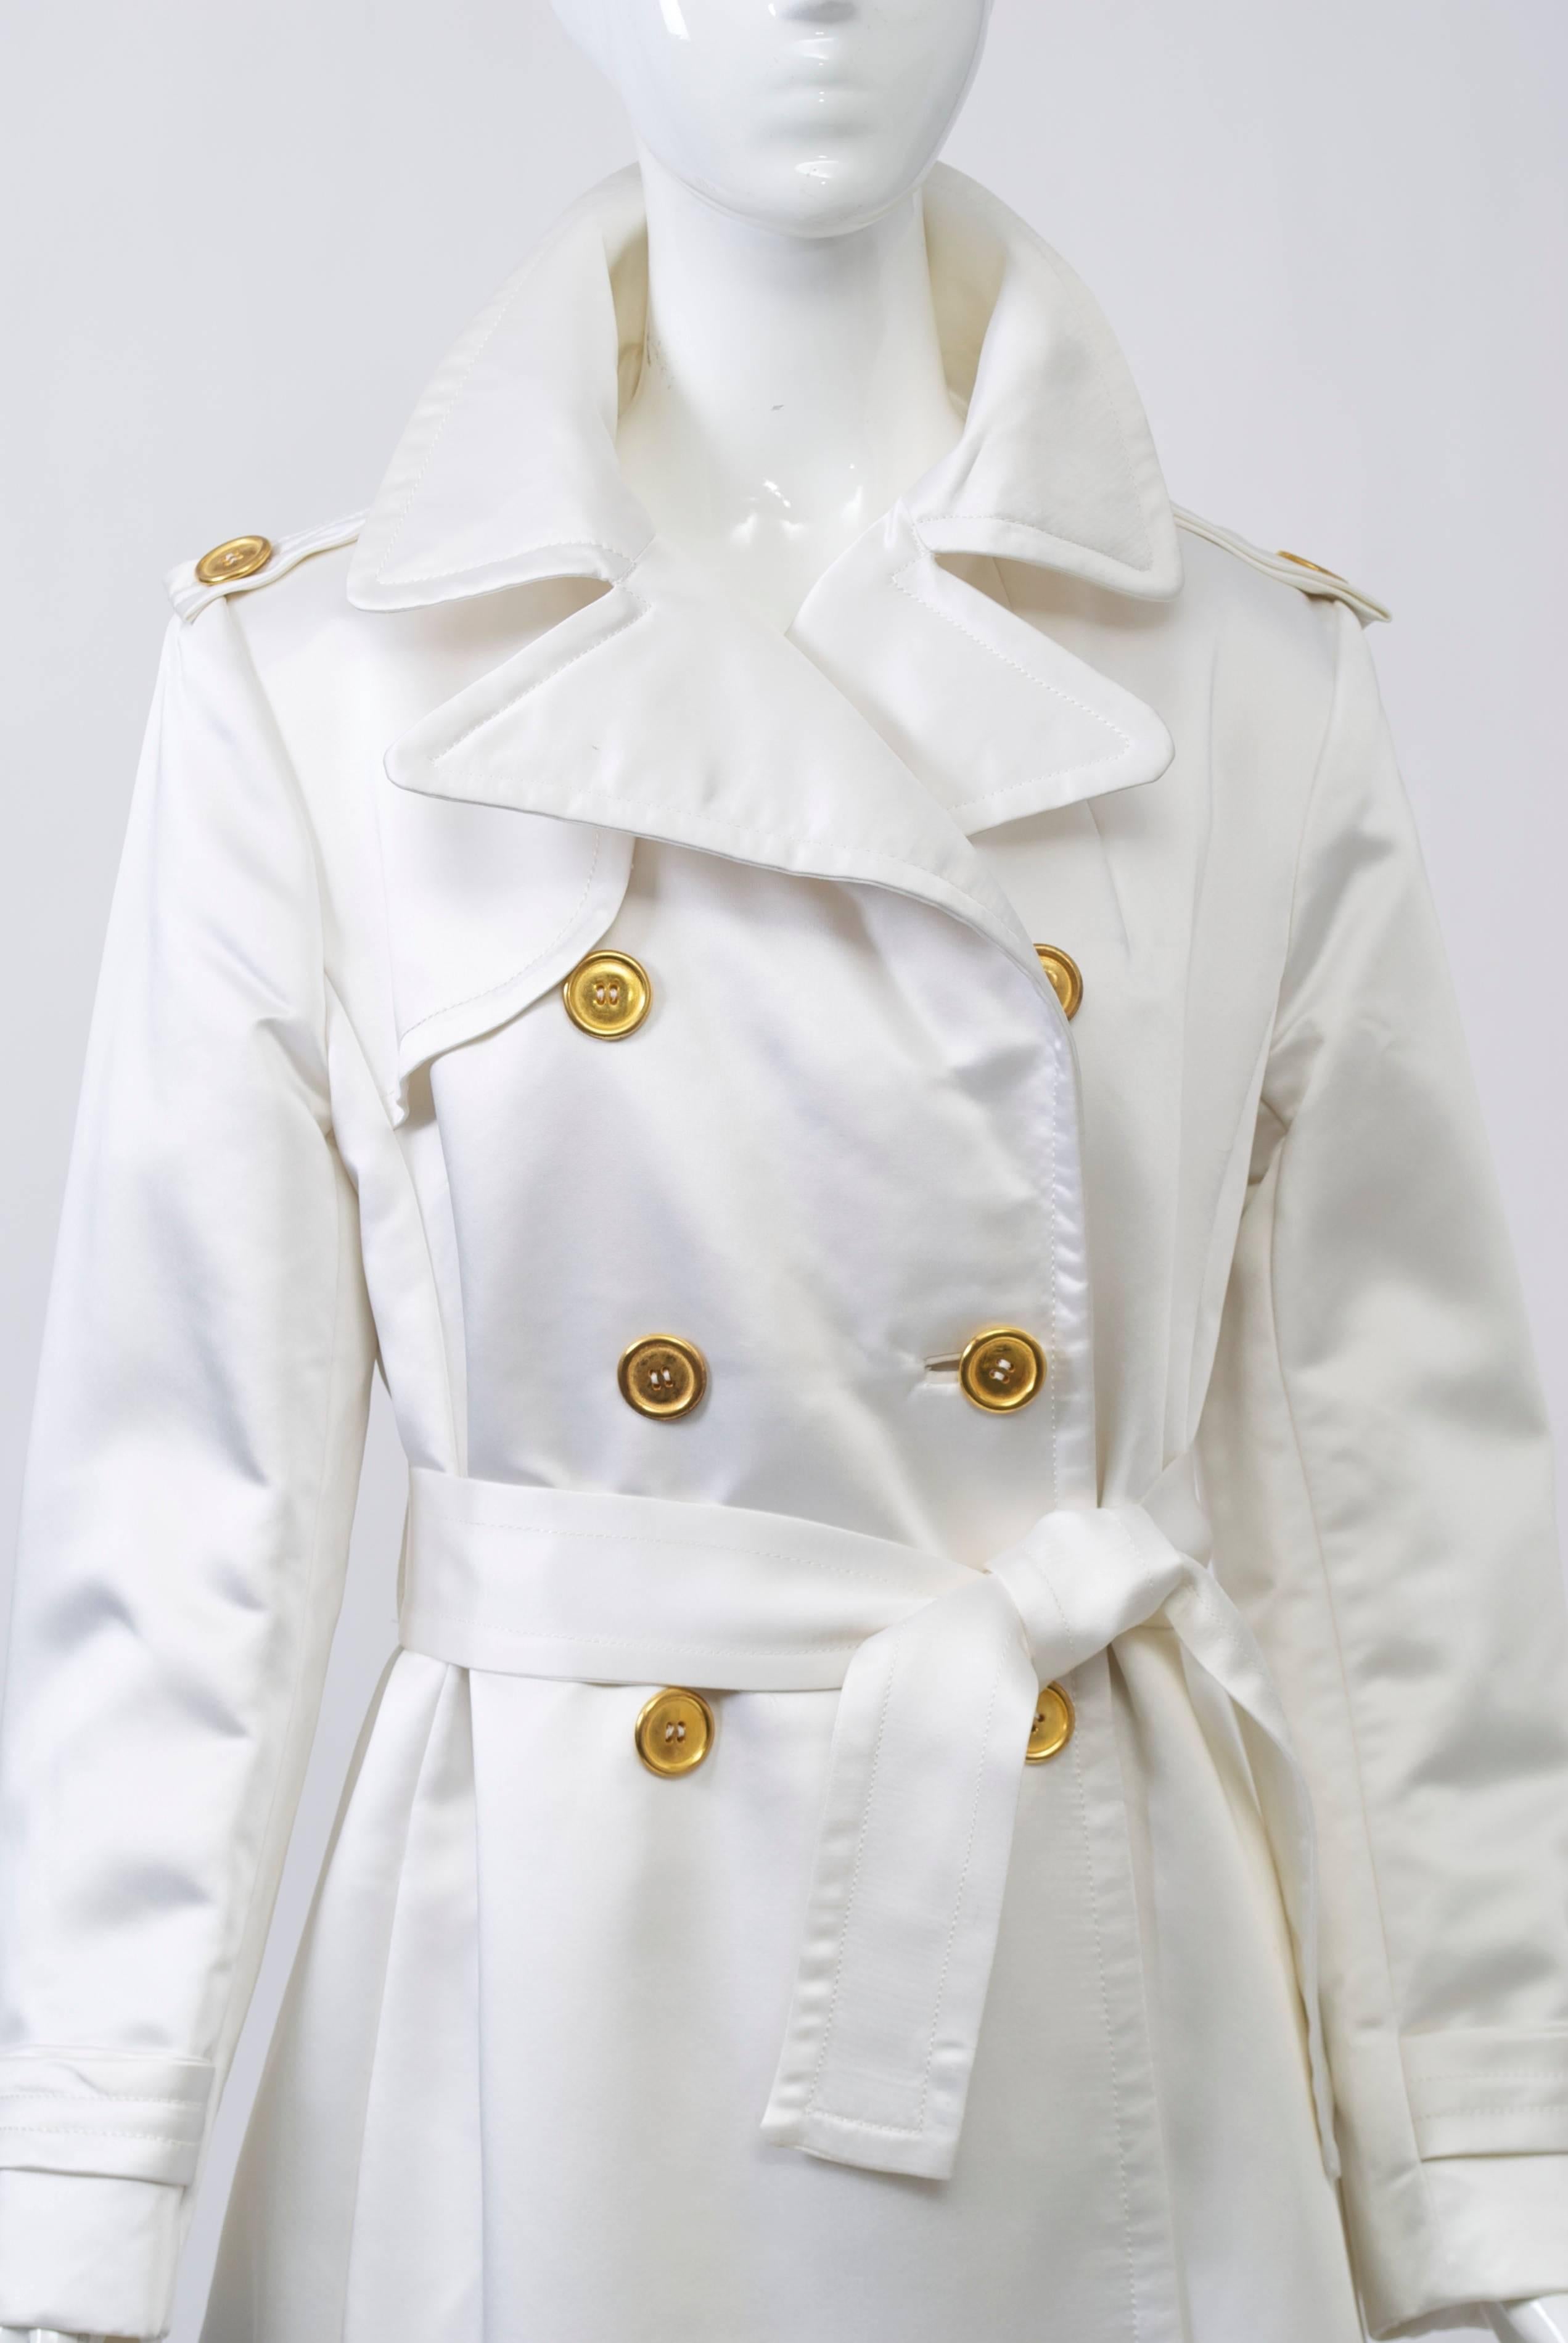 1970s long, trench-style evening coat in white satin with notched collar, epaulets, and self-tie belt. Finished with gold buttons and inverted pleat in back. Satin is backed with stiffener. 